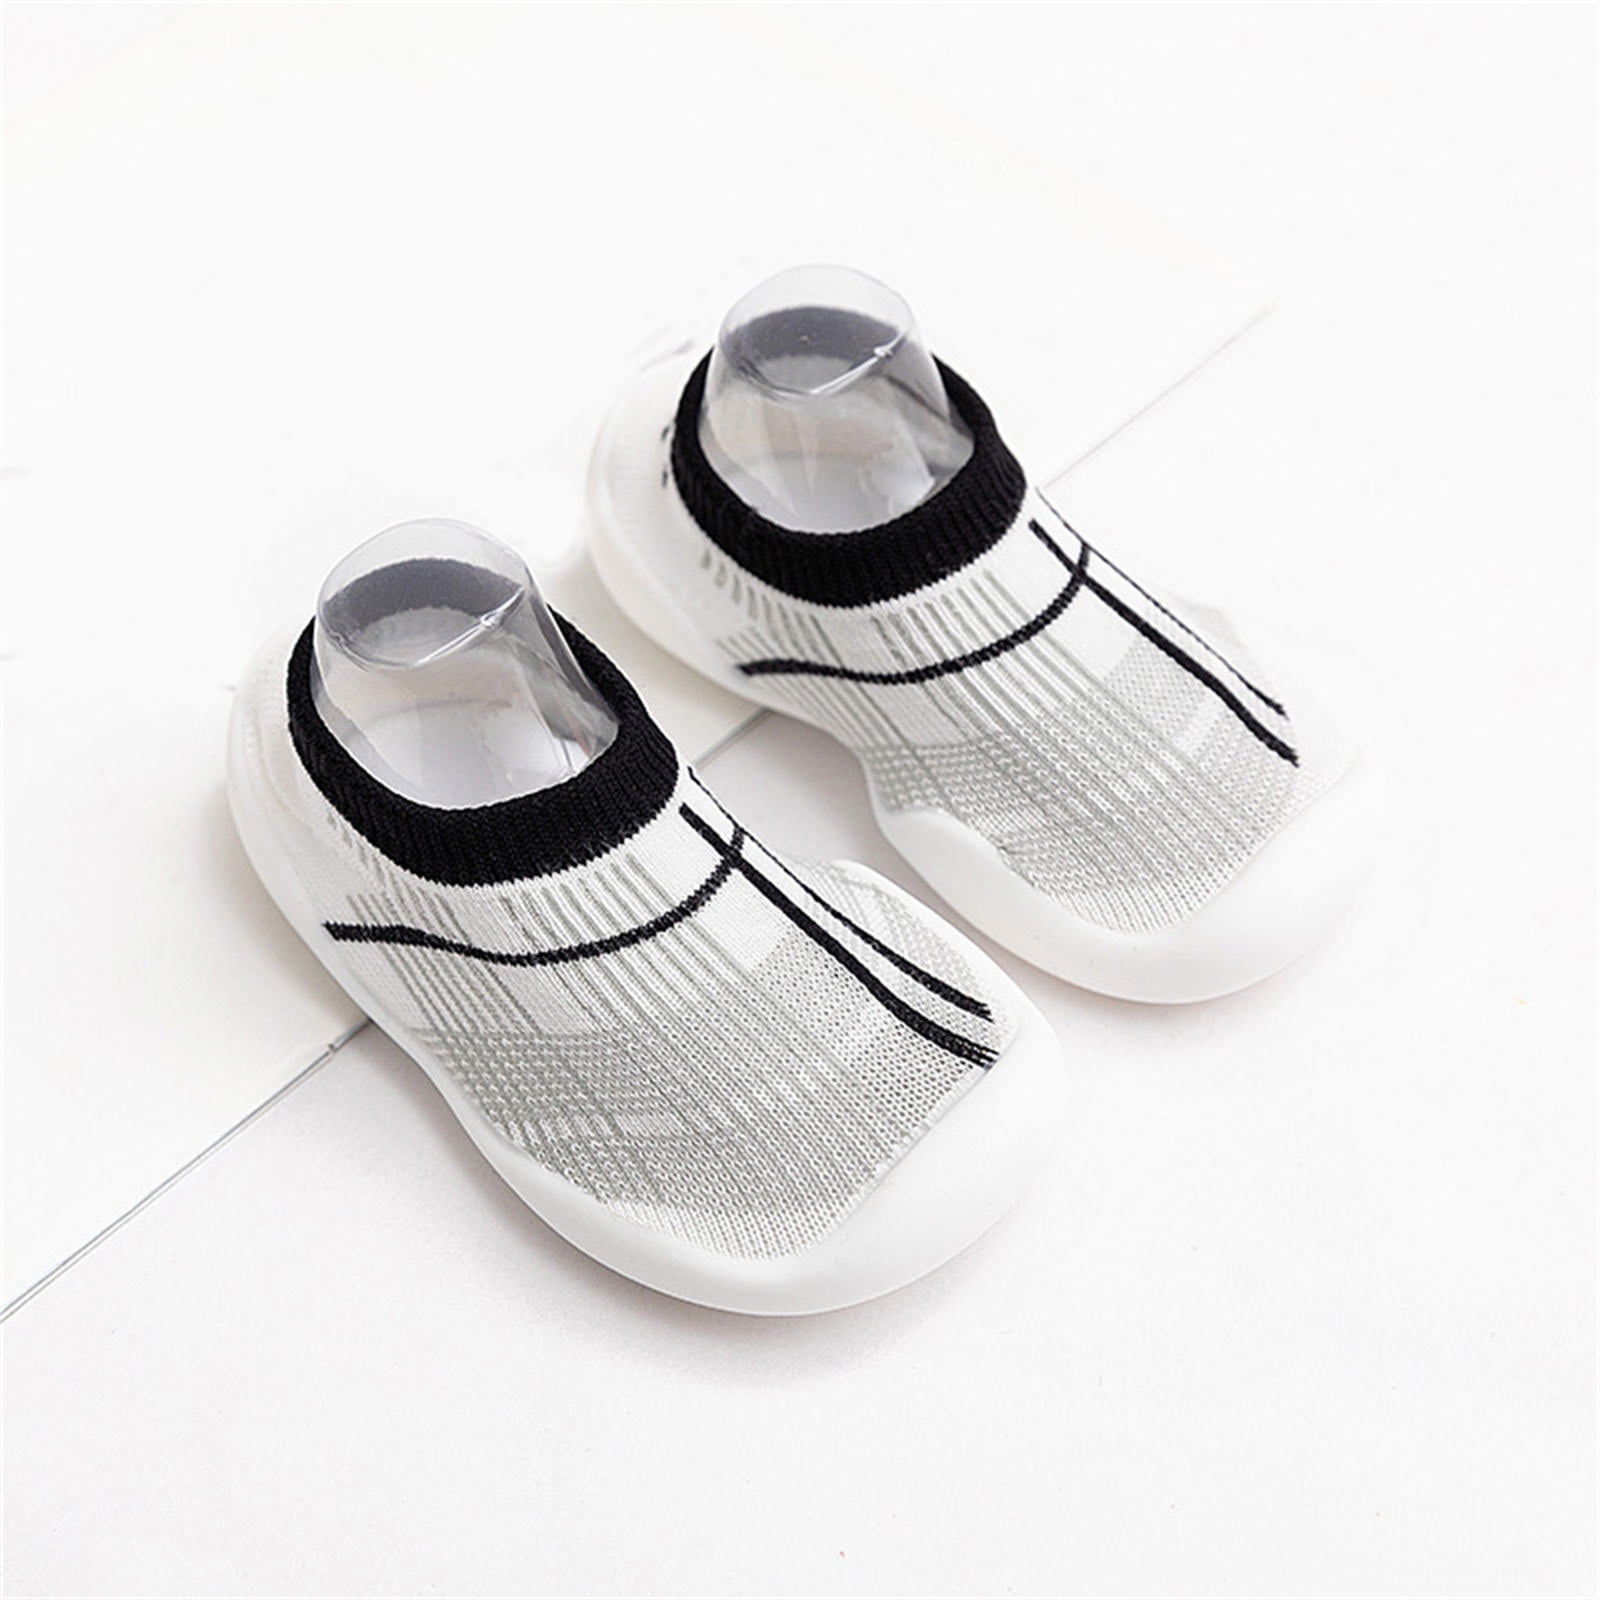 Rciityk Toddler Sock Shoes Baby Boy Girl Indoor First Walking Shoes ...